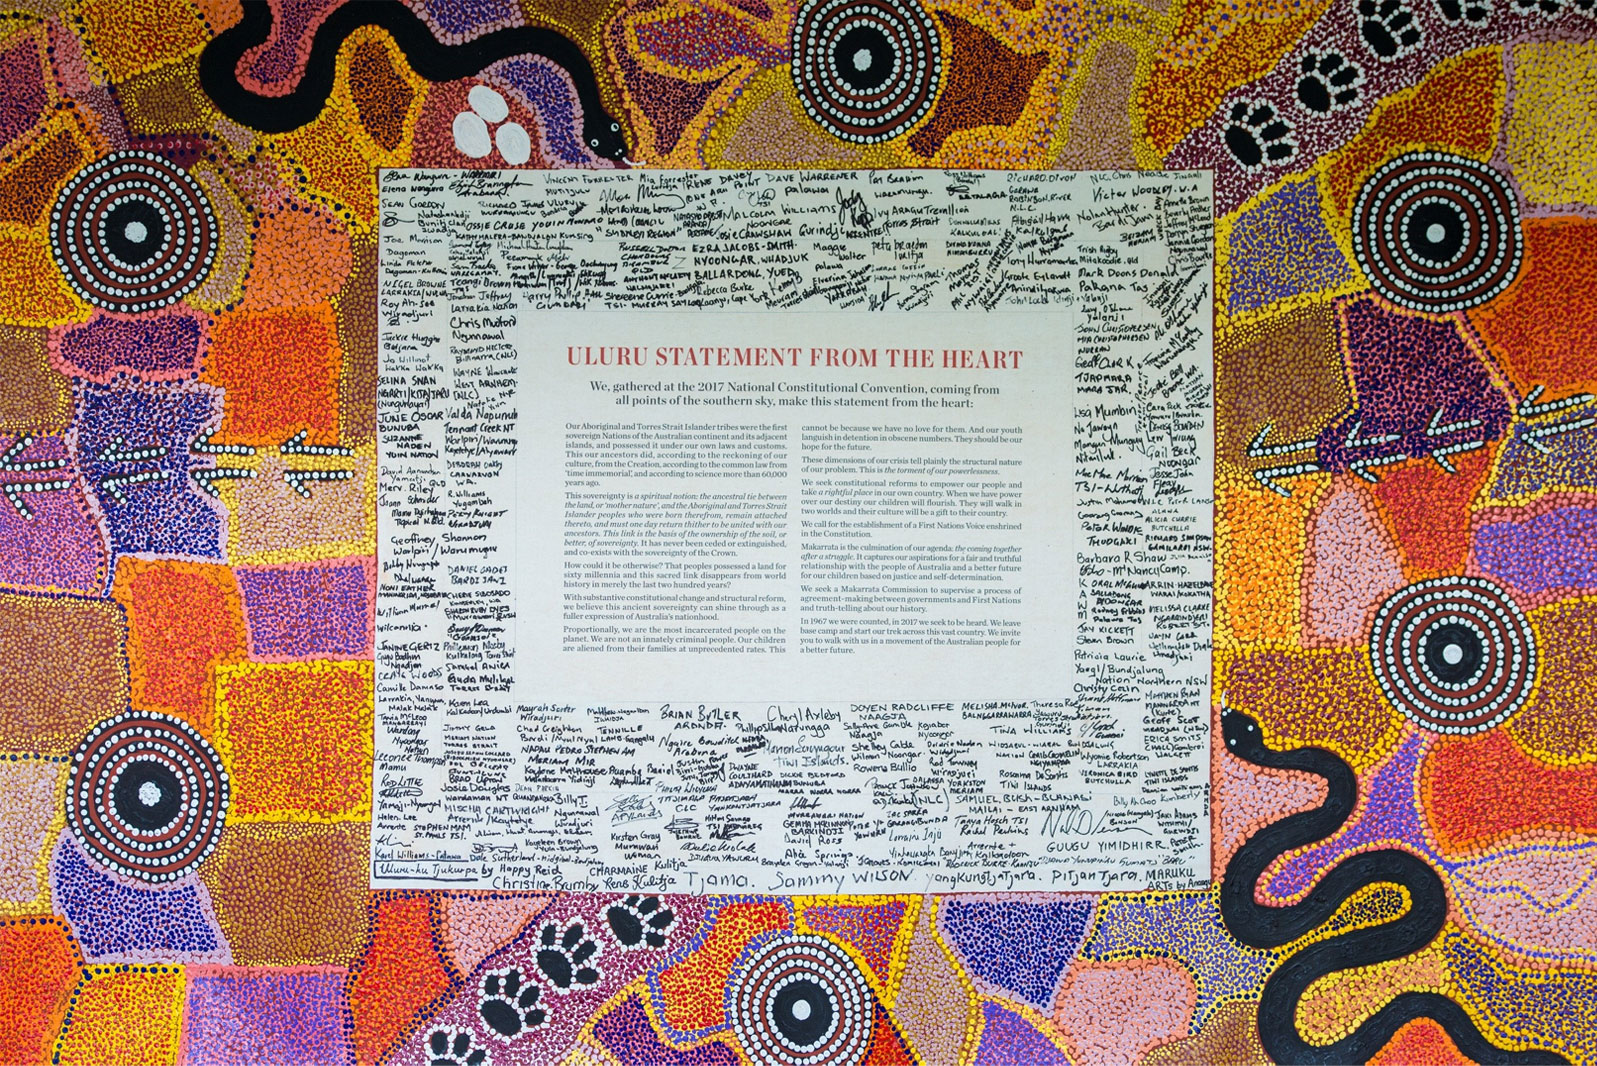 Support for the Uluru Statement and First Nations' Voice